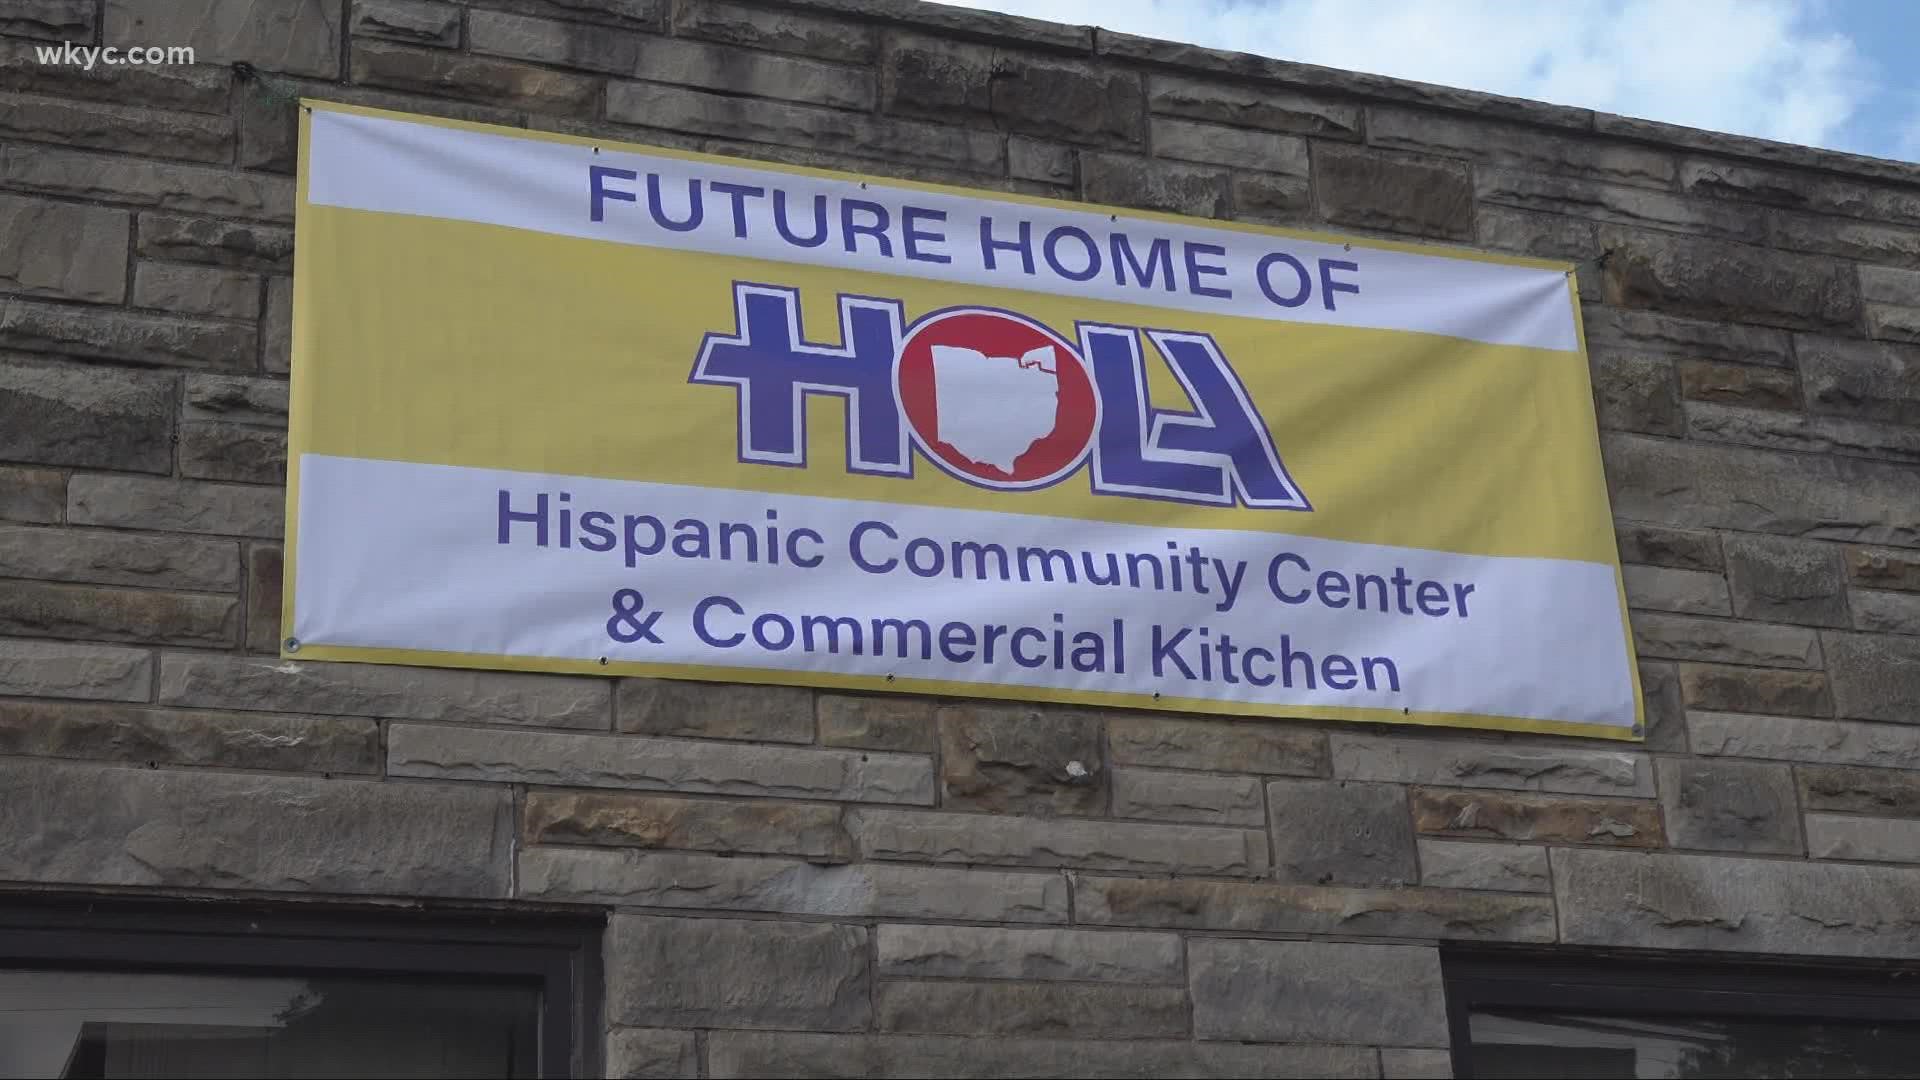 After 5 years of planning, Painesville finally broke ground on a $2 million Hispanic community center.